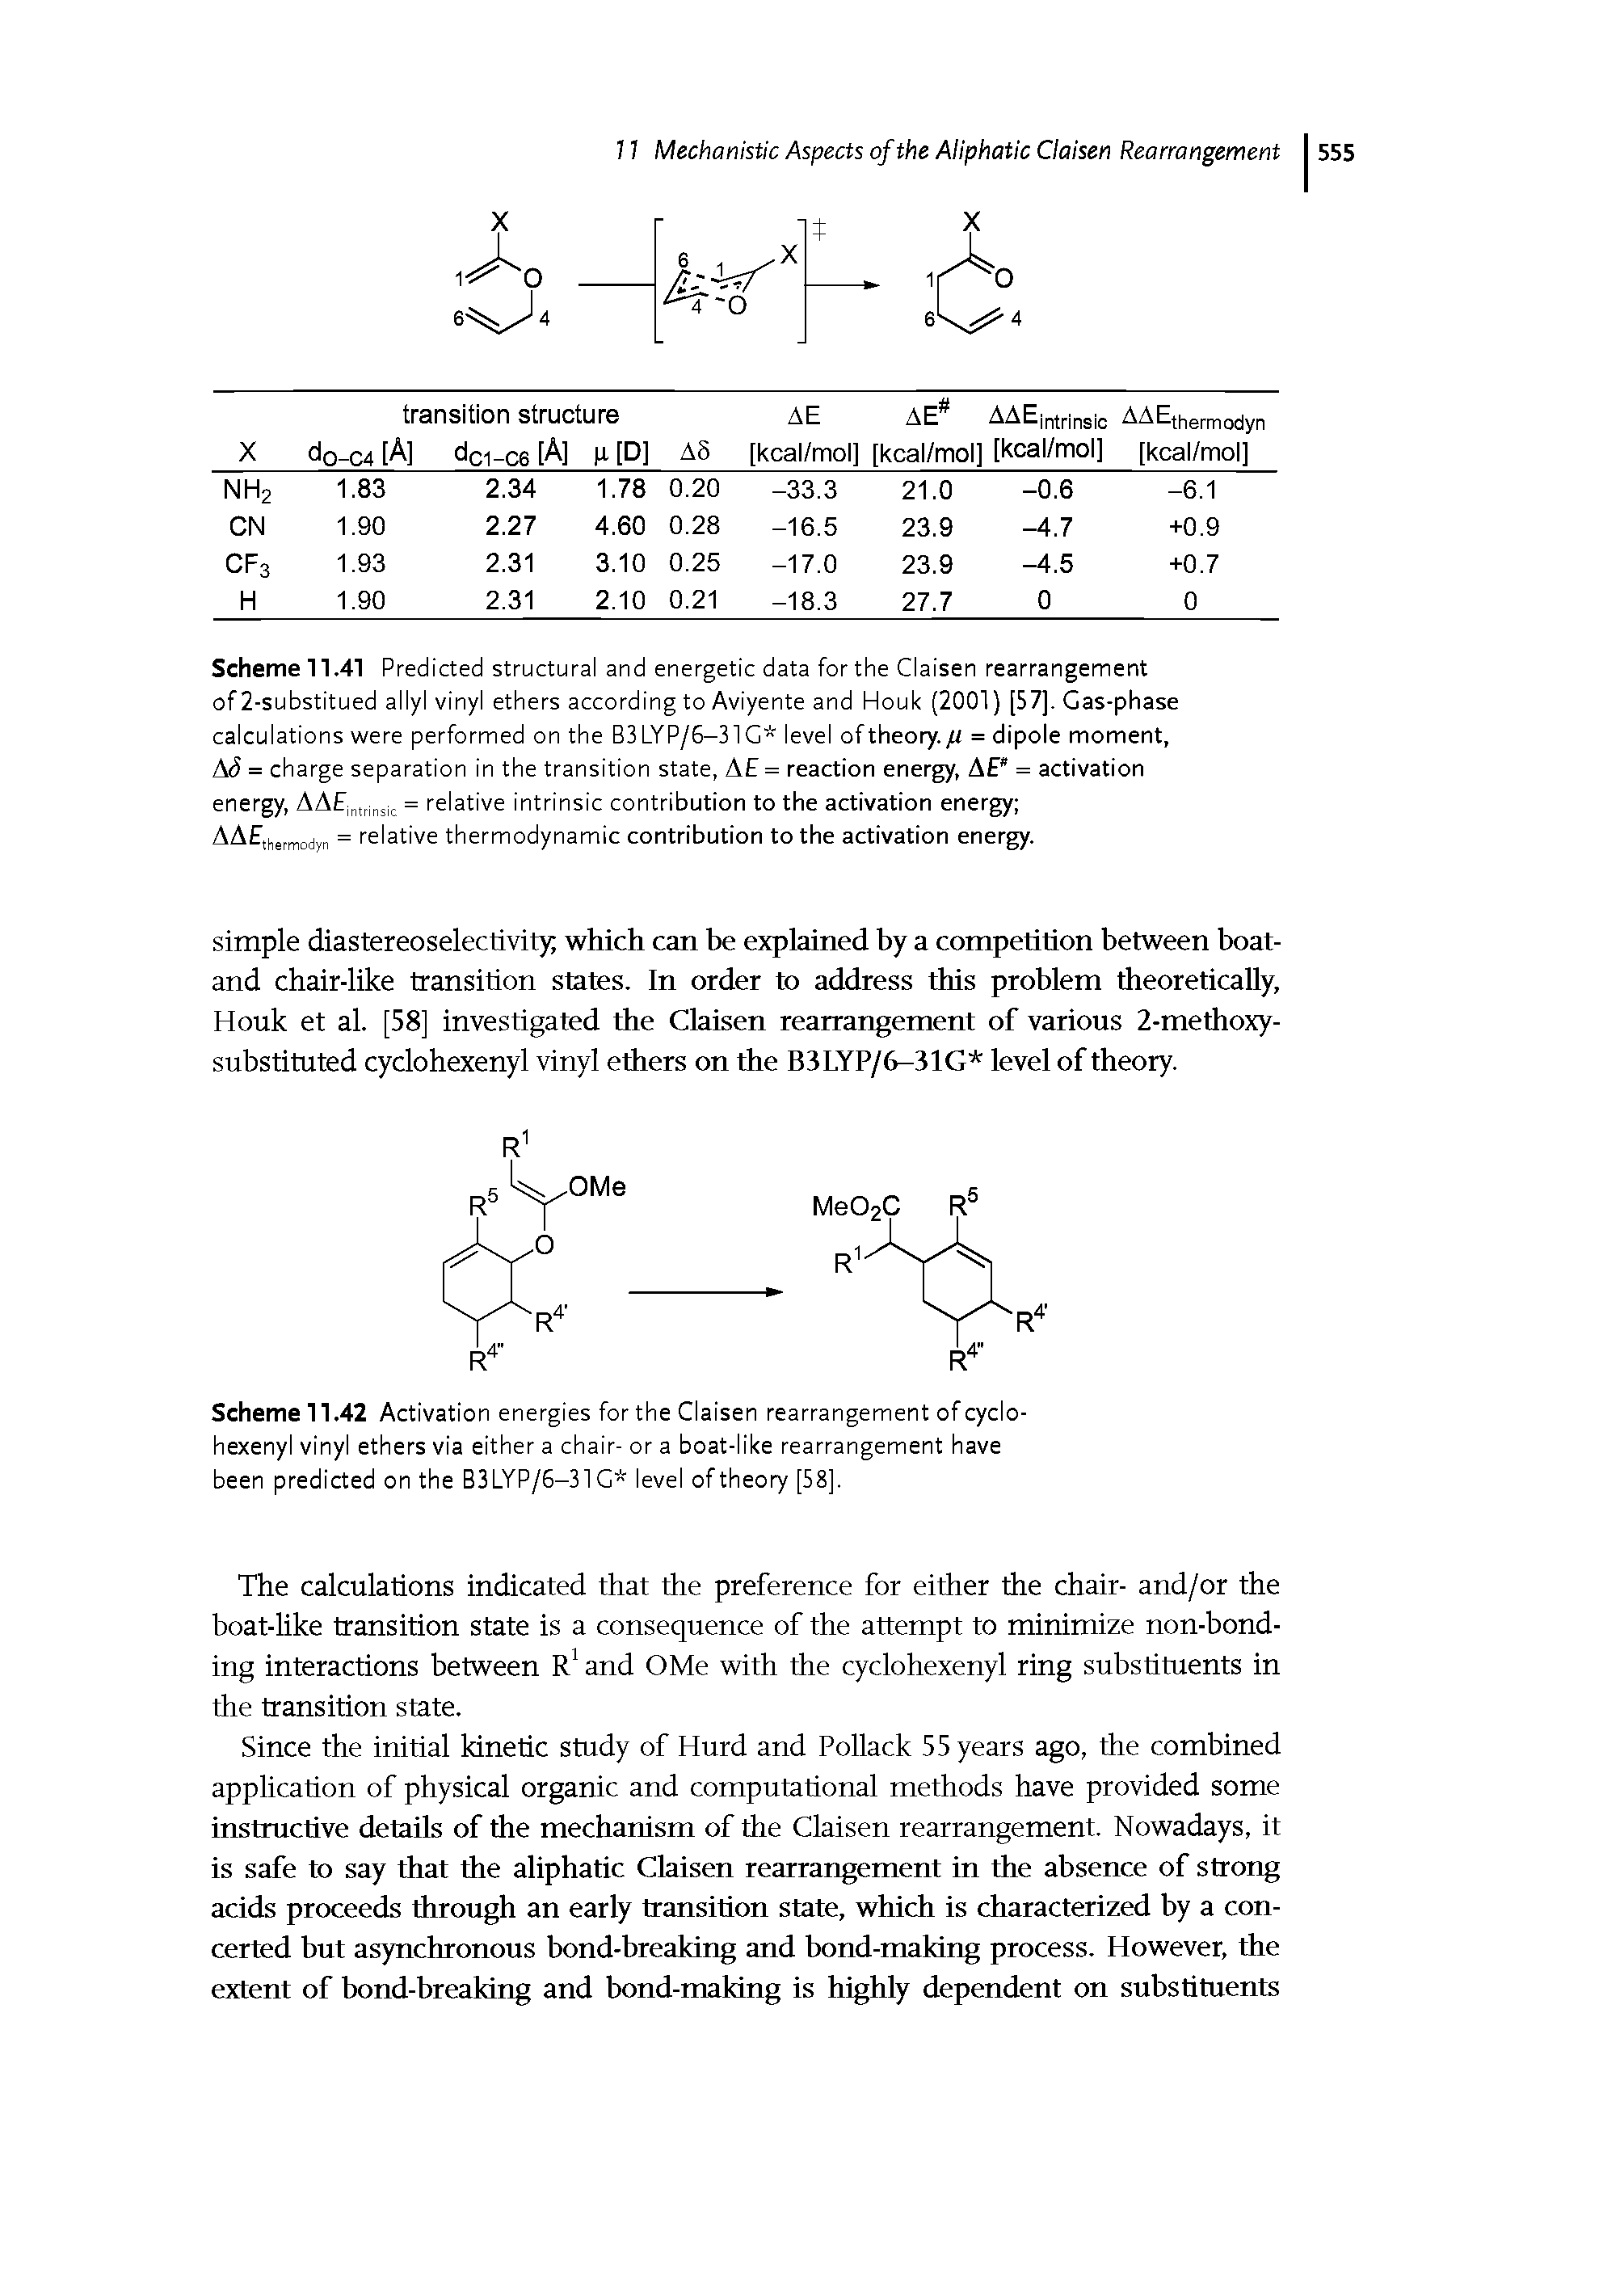 Scheme 11.41 Predicted structural and energetic data for the Claisen rearrangement of 2-substitued allyl vinyl ethers according to Aviyente and Houk (2001) [57], Gas-phase calculations were performed on the B3LYP/5-31G level of theory./< = dipole moment, AS = charge separation in the transition state, A = reaction energy, AE" = activation energy, = relative intrinsic contribution to the activation energy ...